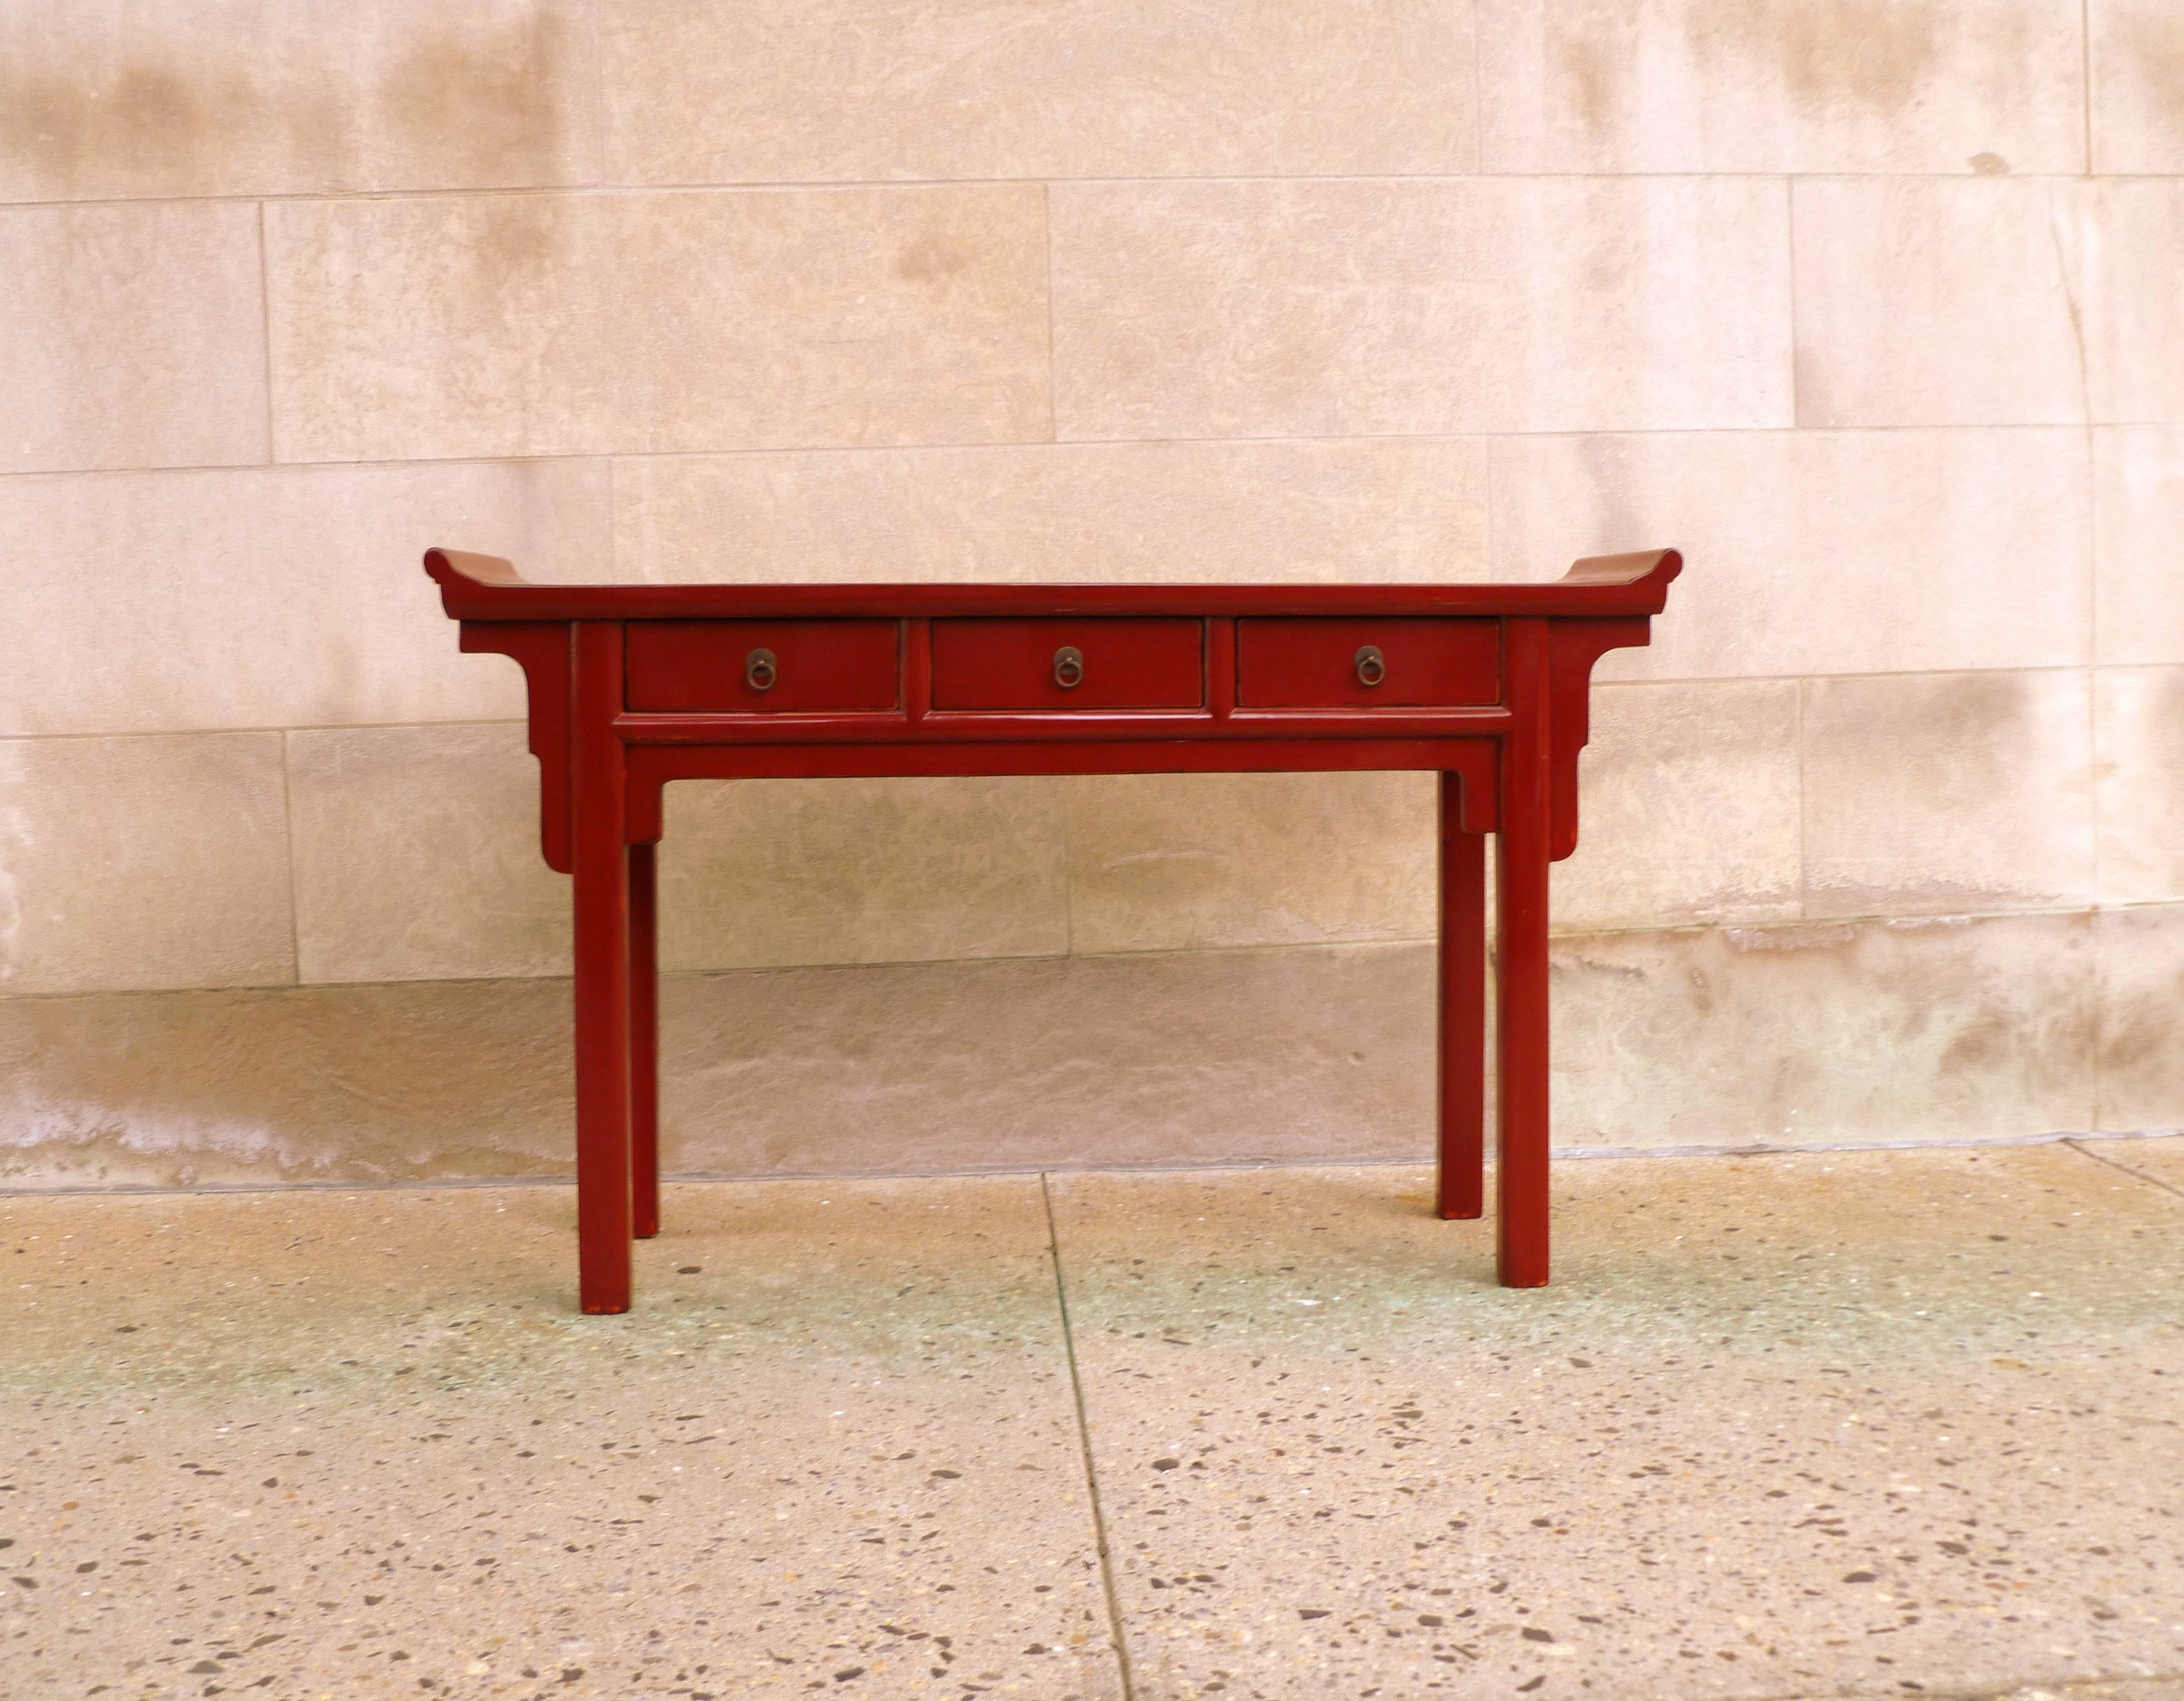 An elegant red lacquer console table with three drawers and everted flanges, beautiful color, form and lines. We carry fine quality furniture with elegant finished and has been appeared many times in 